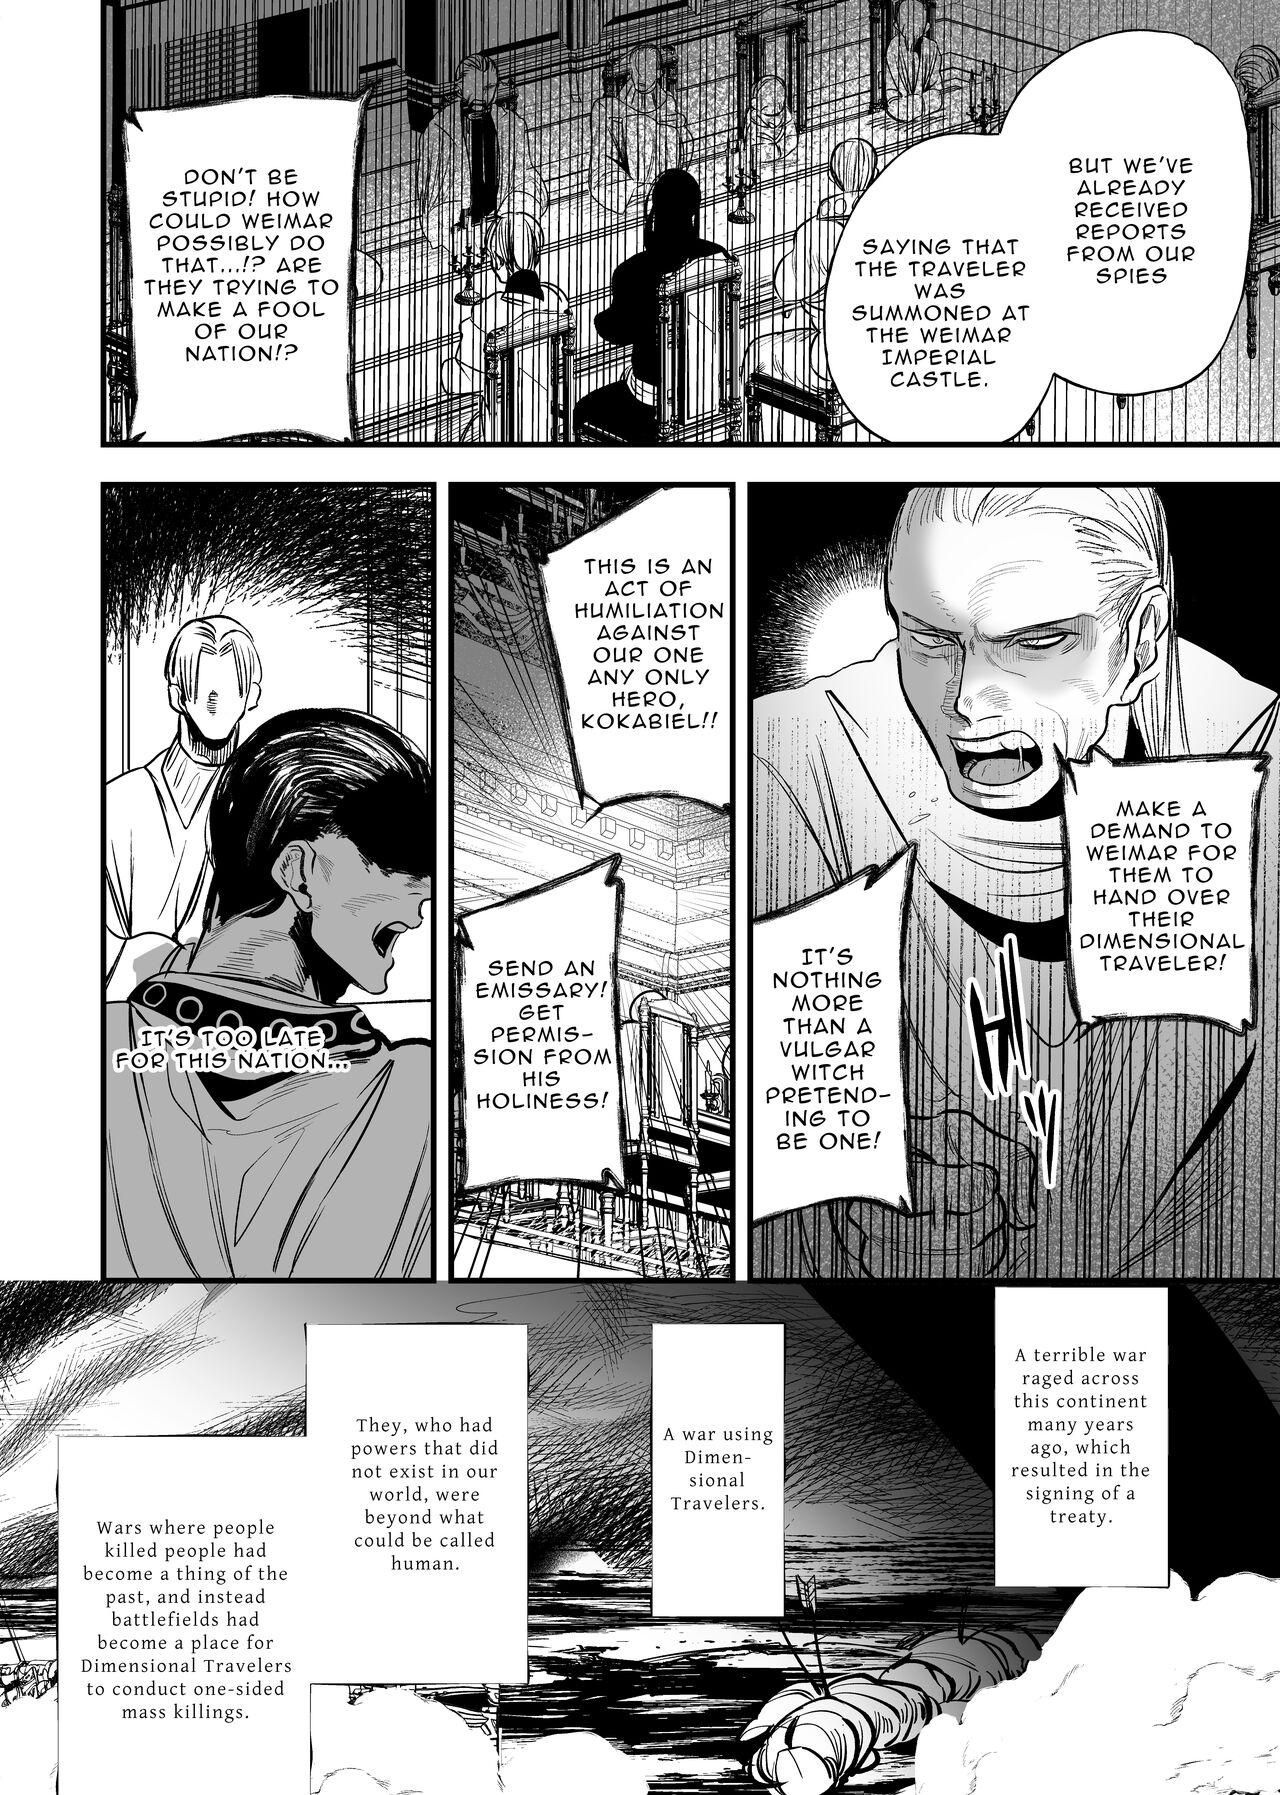 Naked Sluts The Man Who Saved Me on my Isekai Trip was a Killer... 2 - Original Roludo - Page 6